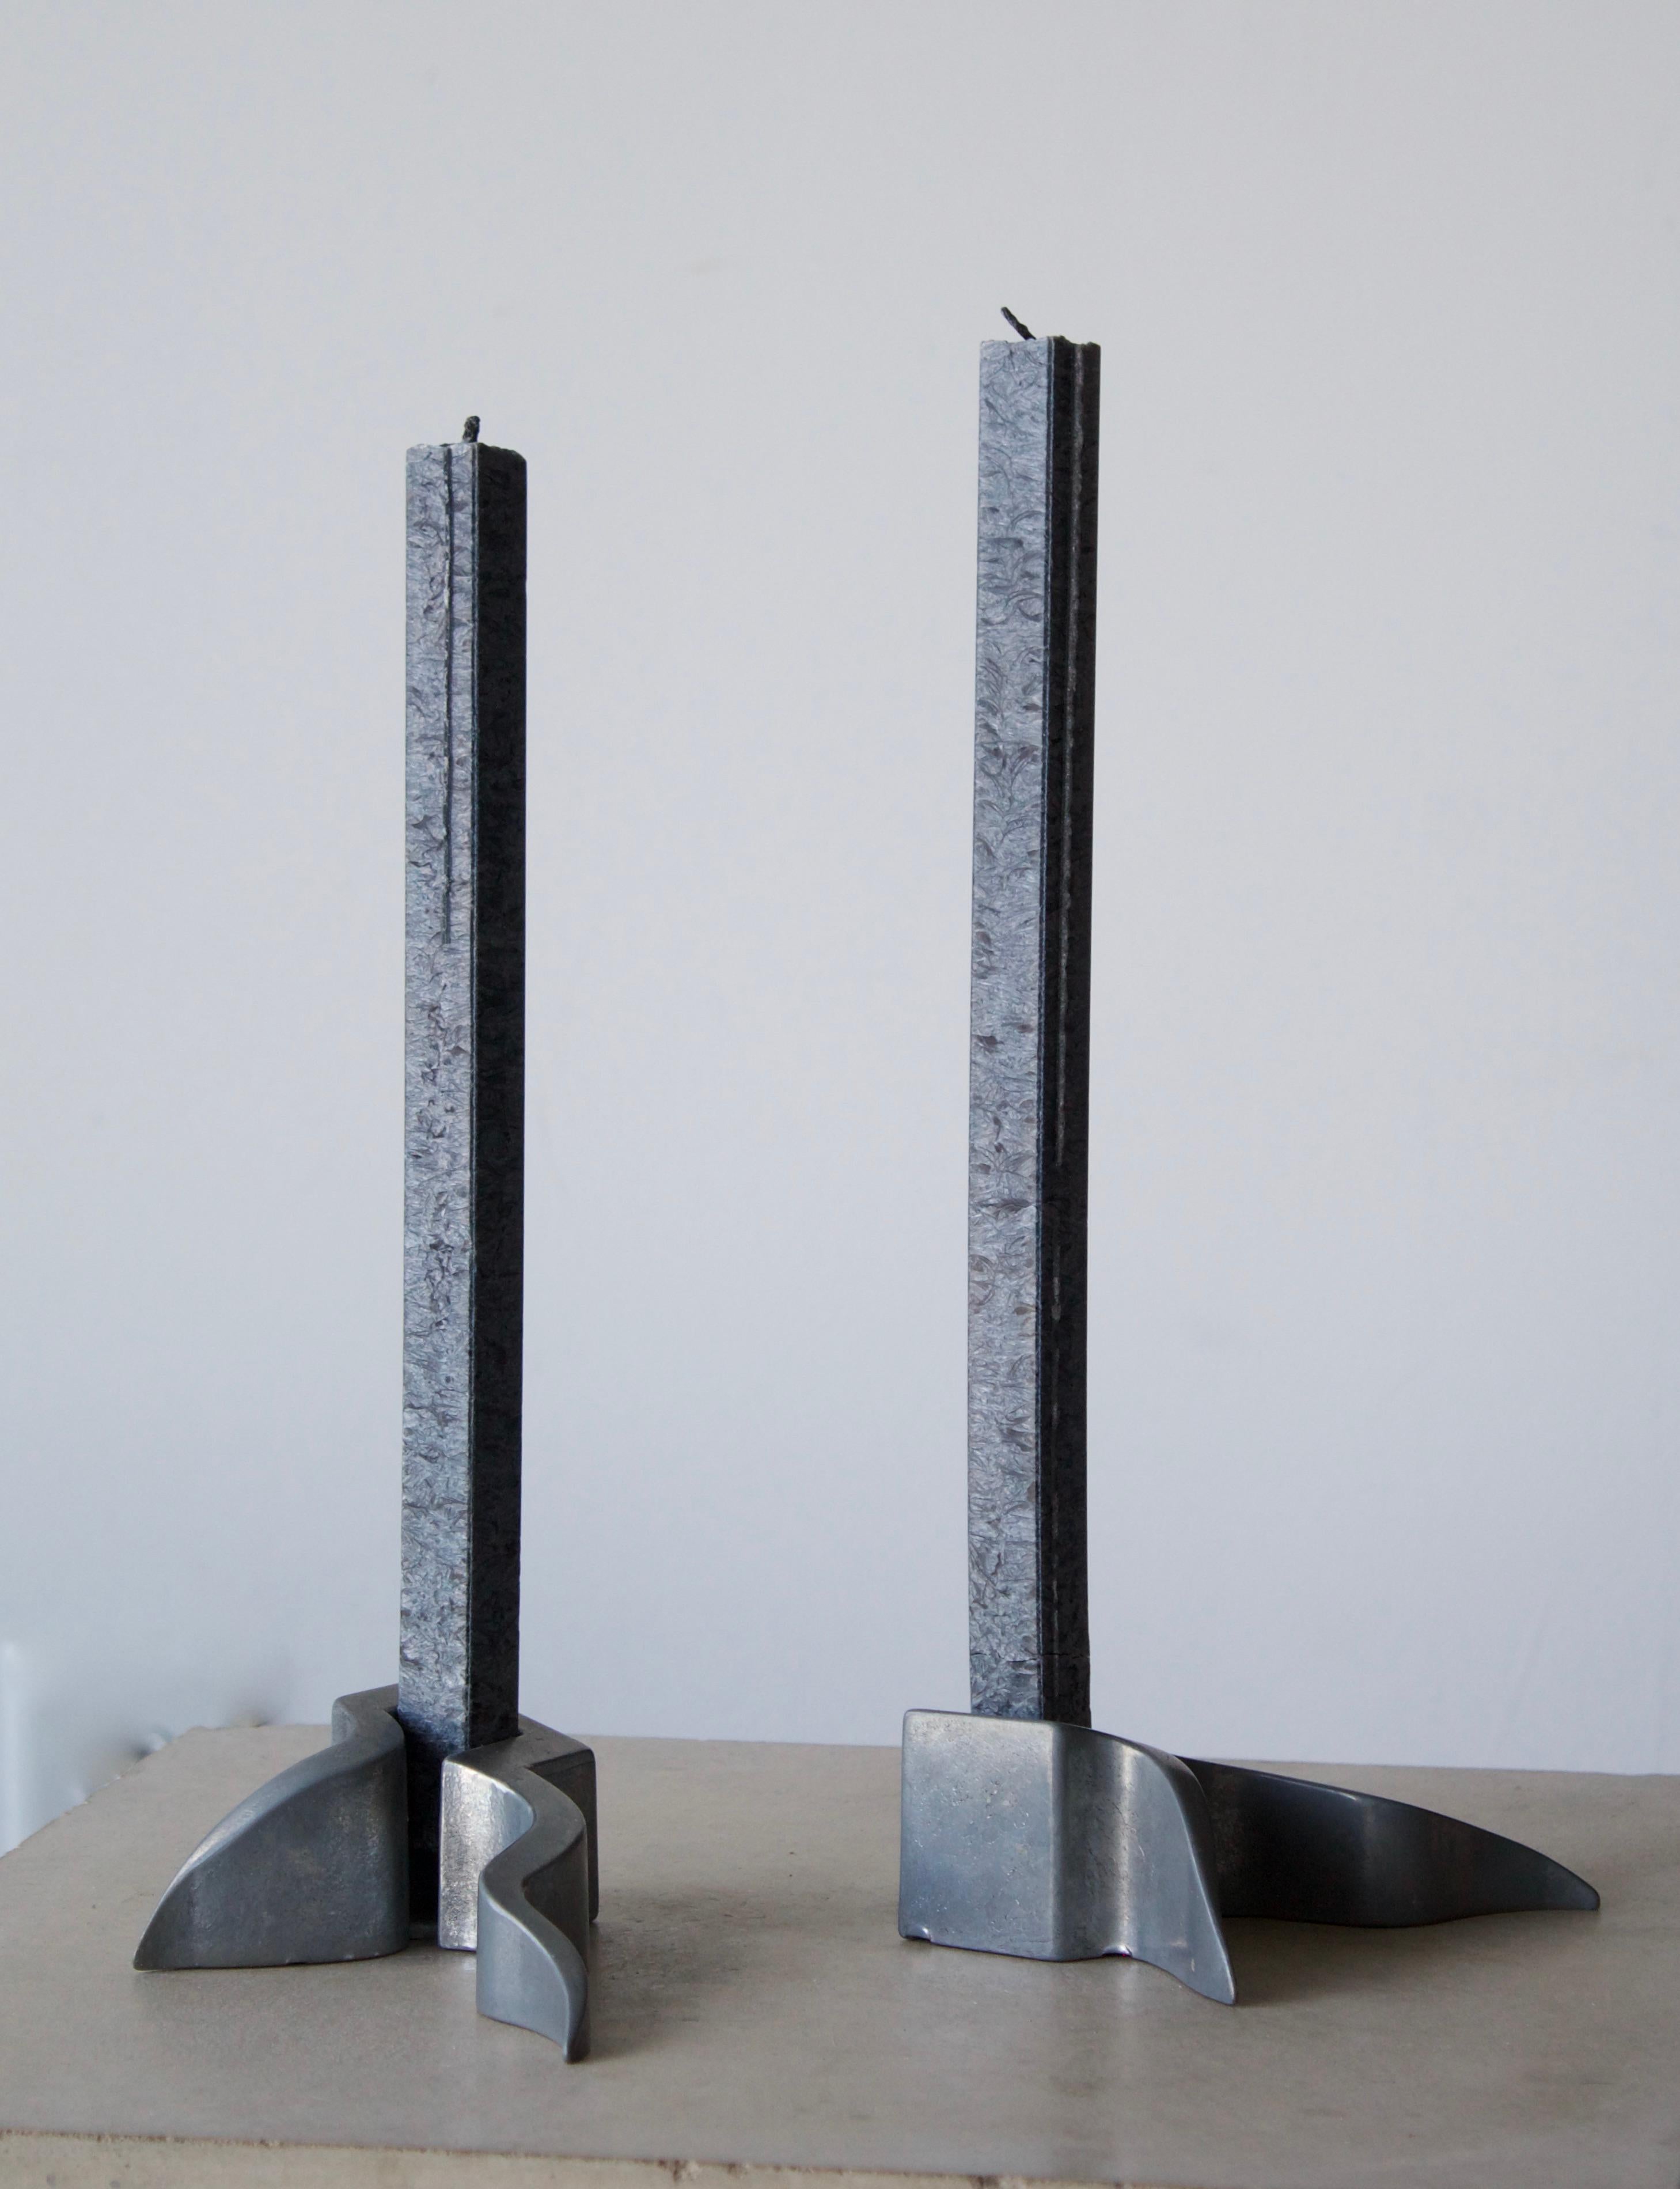 A pair of organic candlesticks / candleholders. In organically shaped metal. Holds square candles.

Other designers of the period include Isamu Noguchi, Vladimir Kagan, Gio Ponti, and Piet Hein.